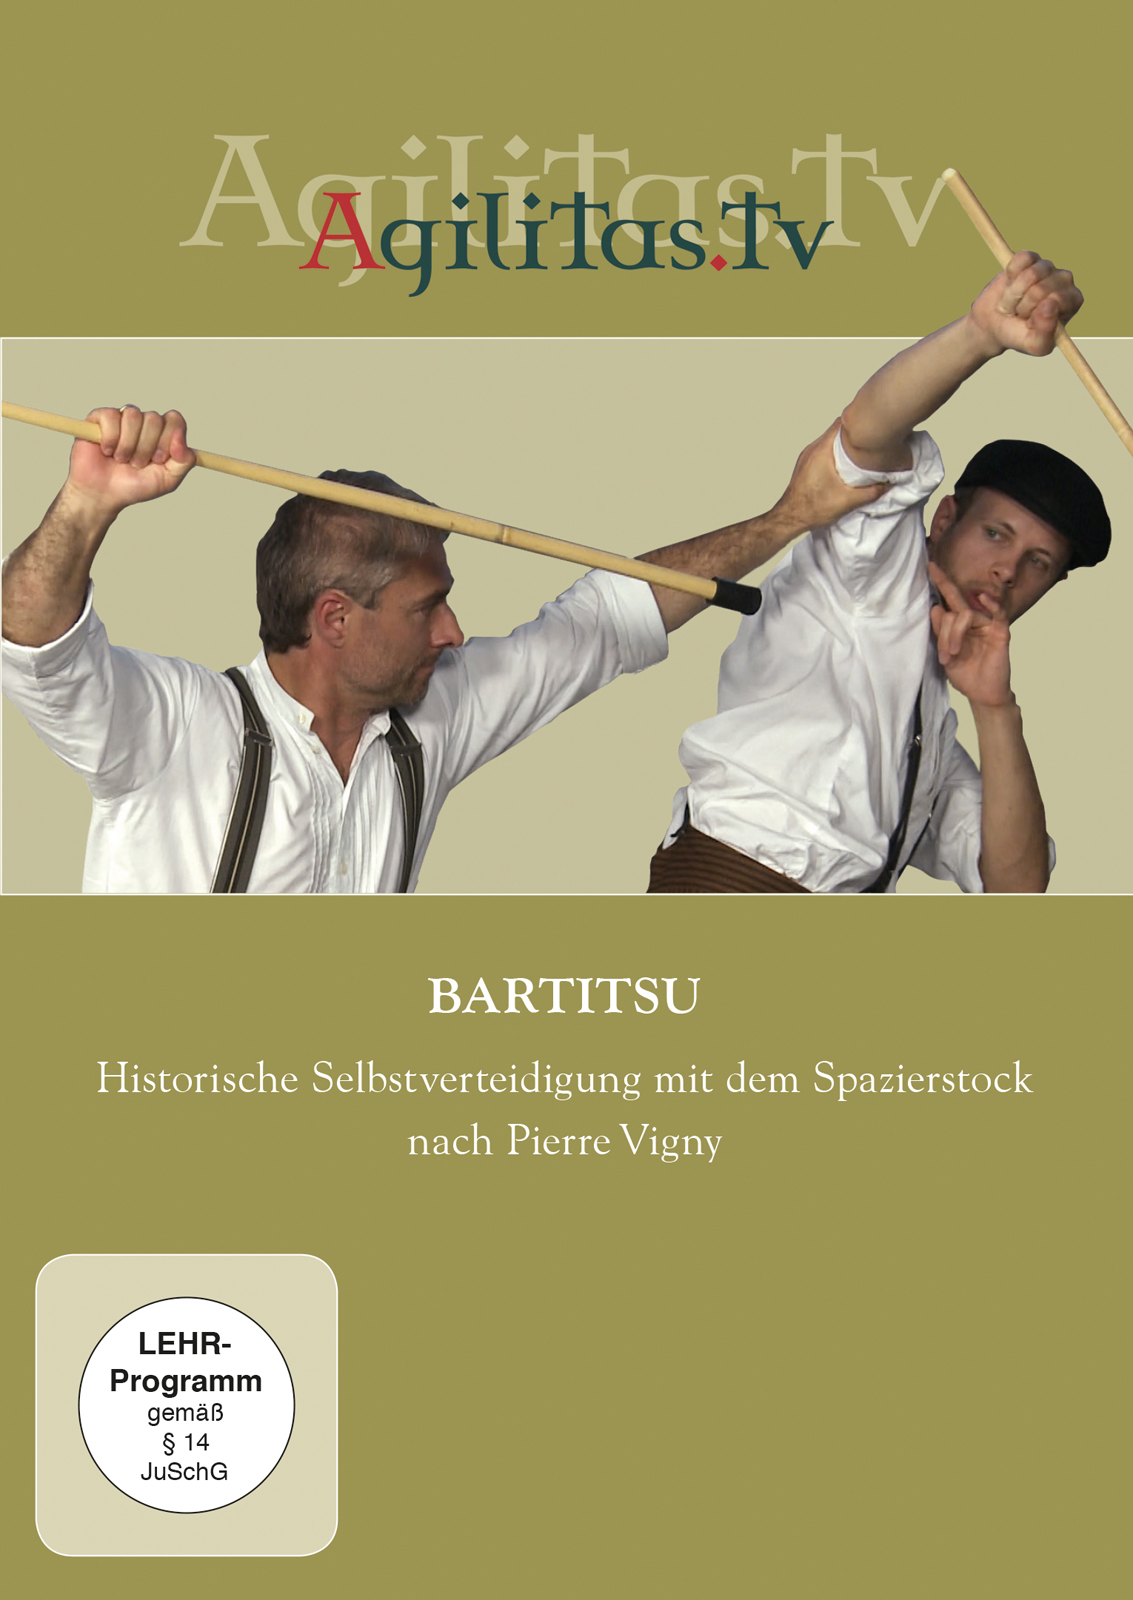 Bartitsu - Historical self-defense with the walking stick by Pierre Vigny